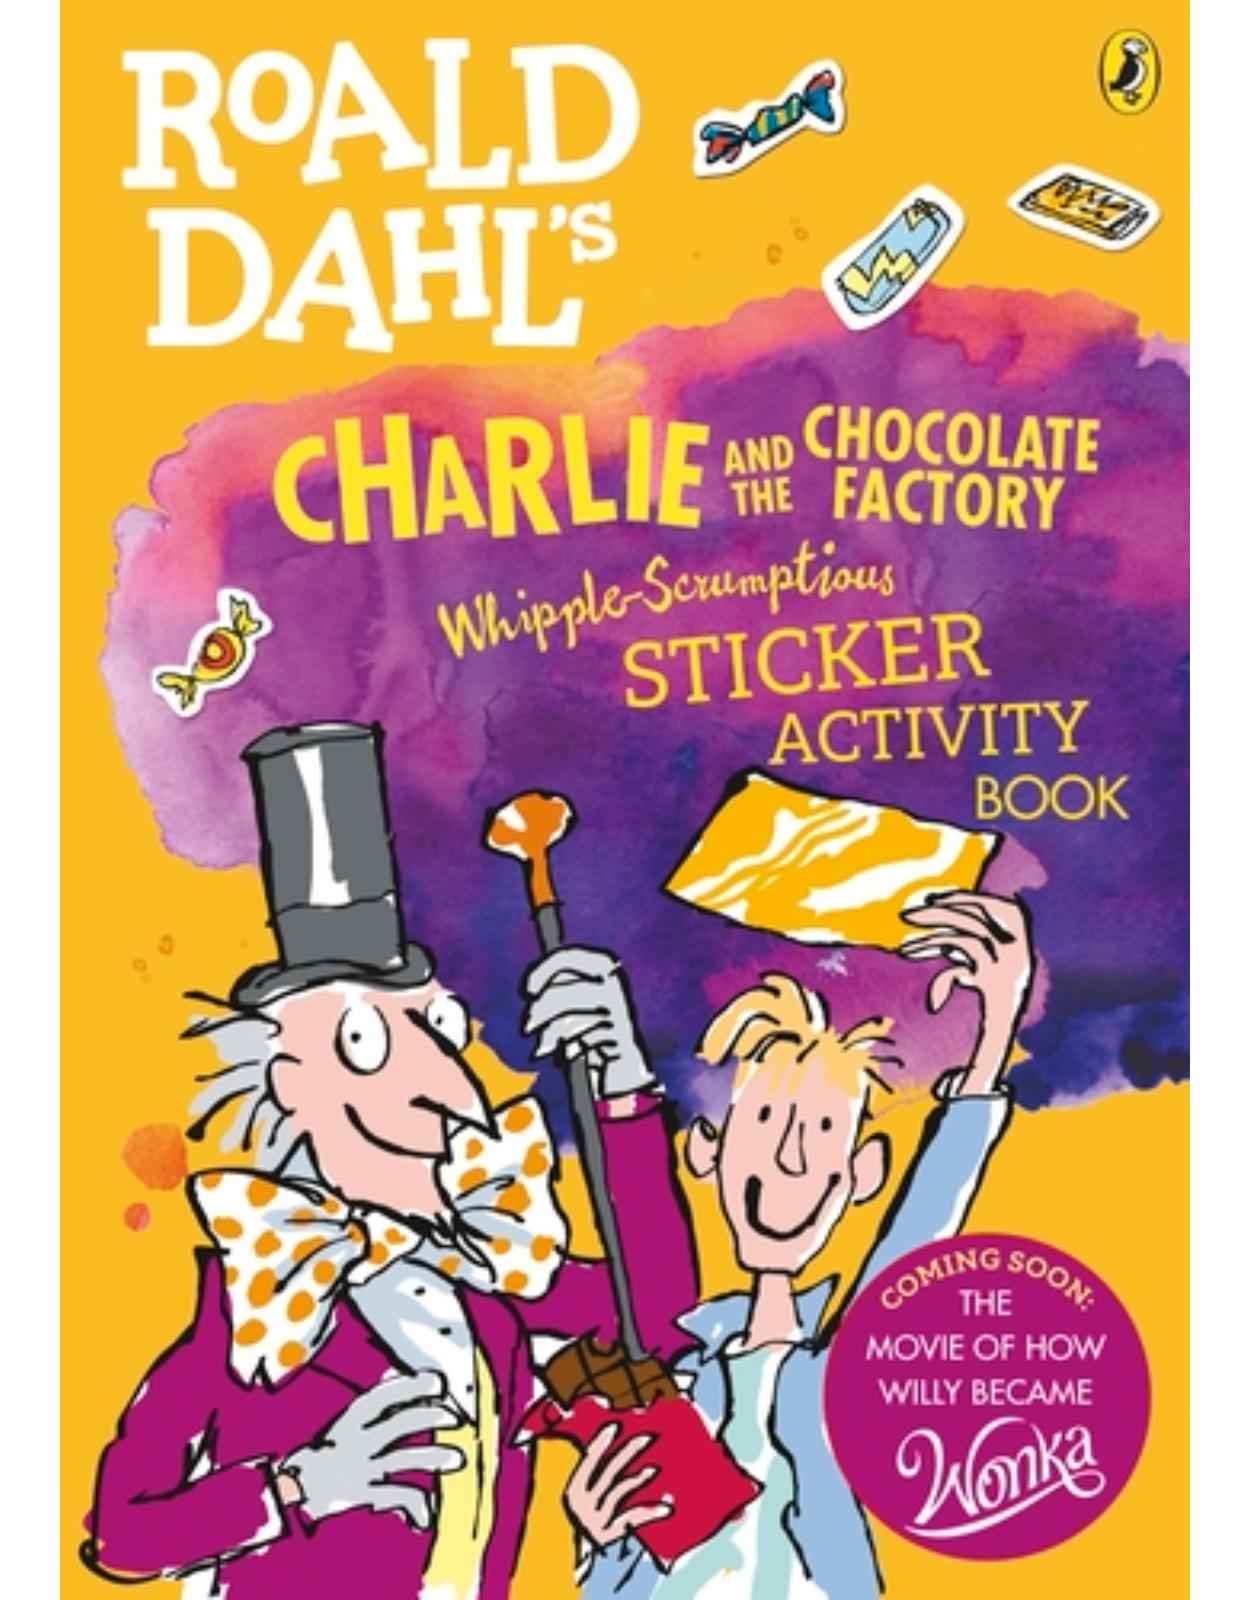 Roald Dahl’s Charlie and the Chocolate Factory Whipple-Scrumptious Sticker Activity Book